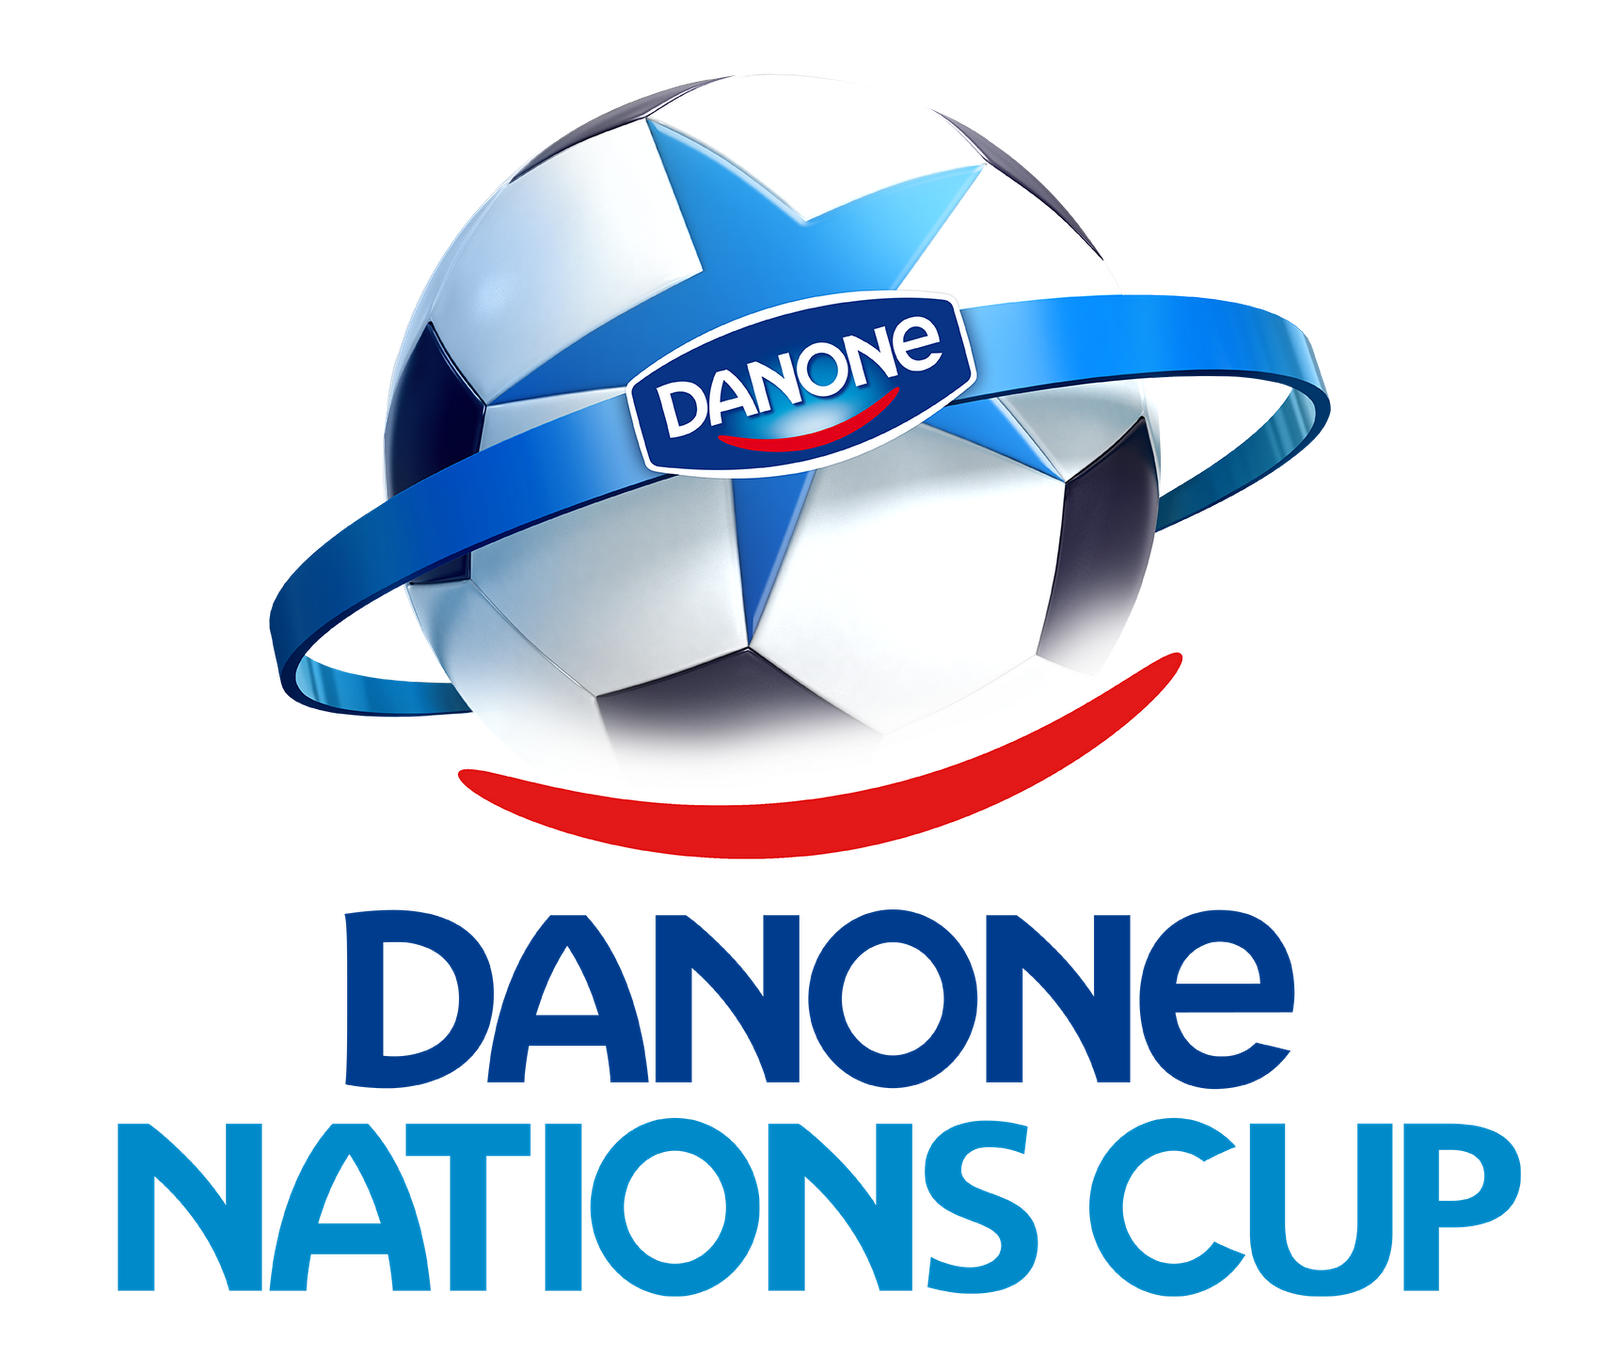 Danone Nations Cup Danone+Nations+Cup+Logo